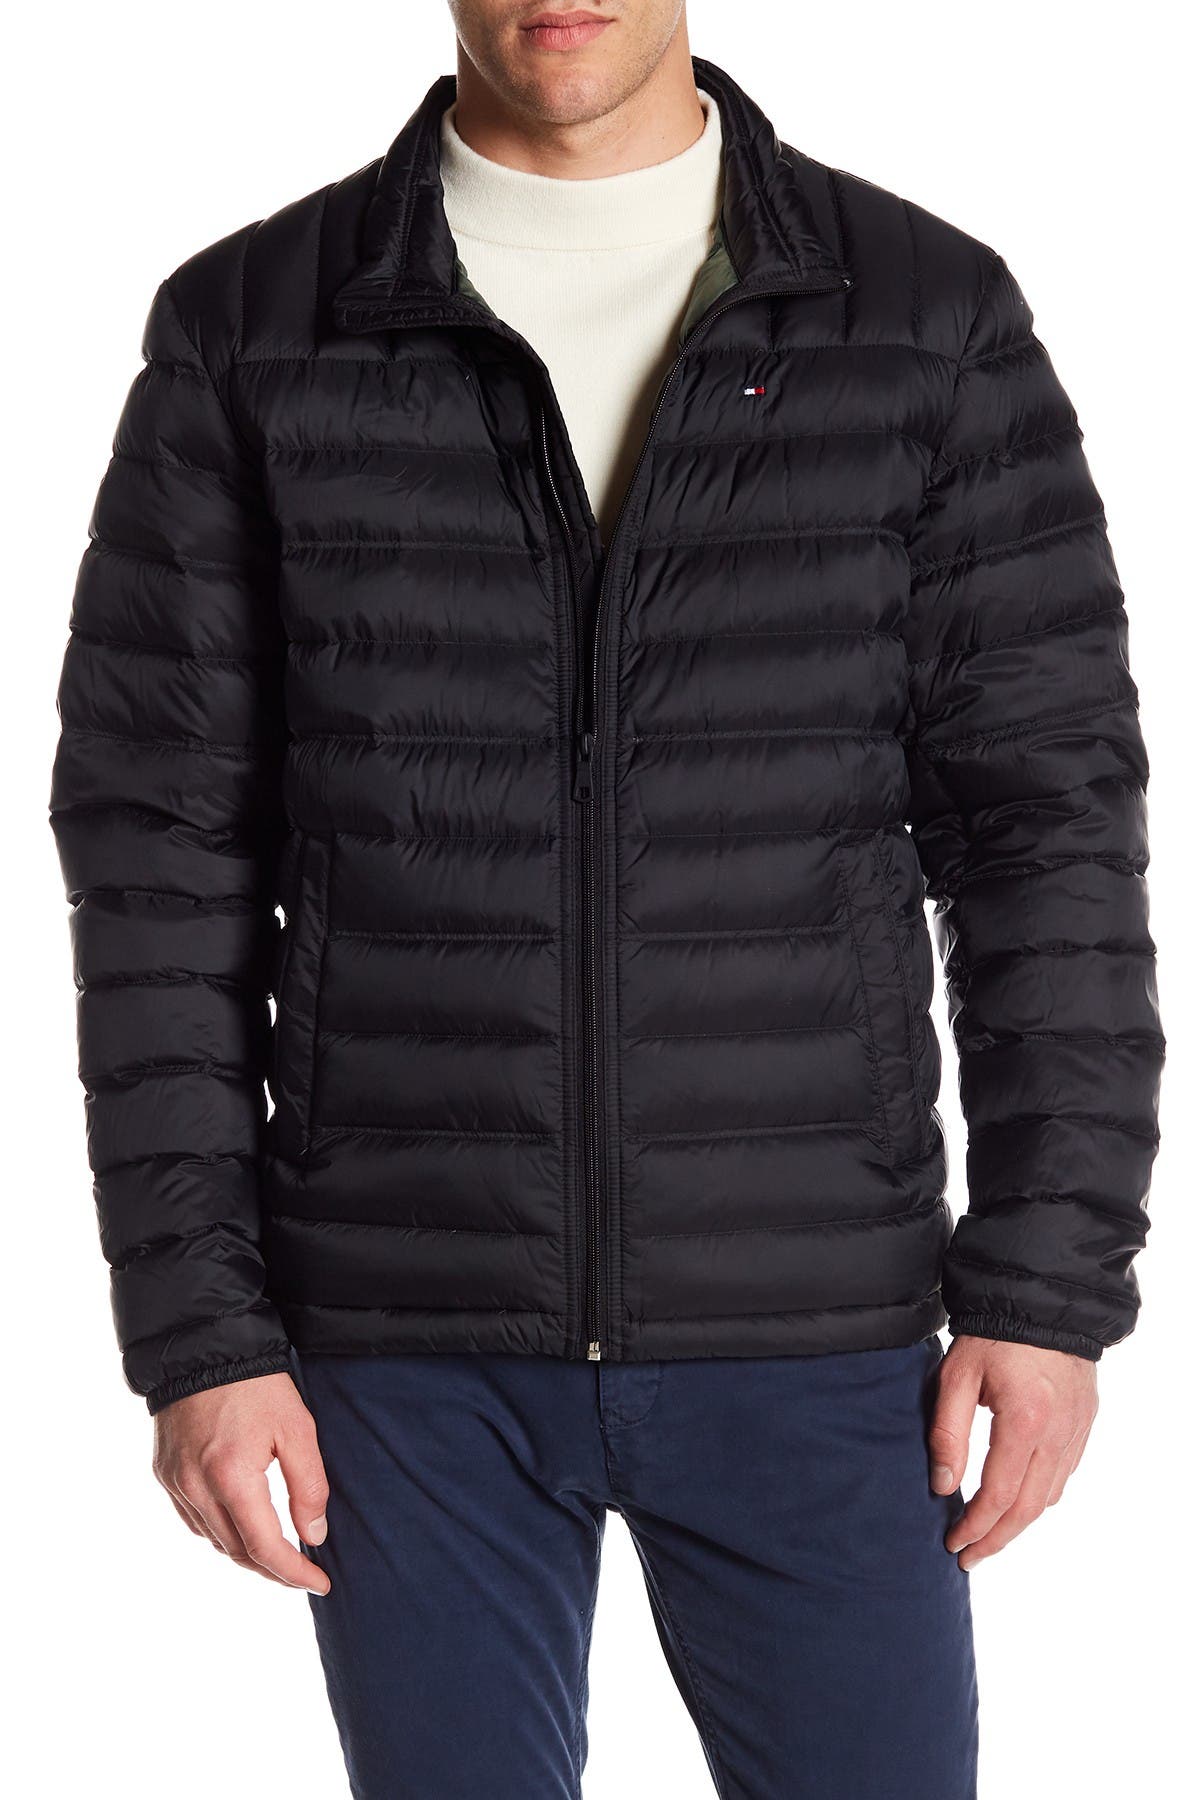 tommy hilfiger packable down jacket